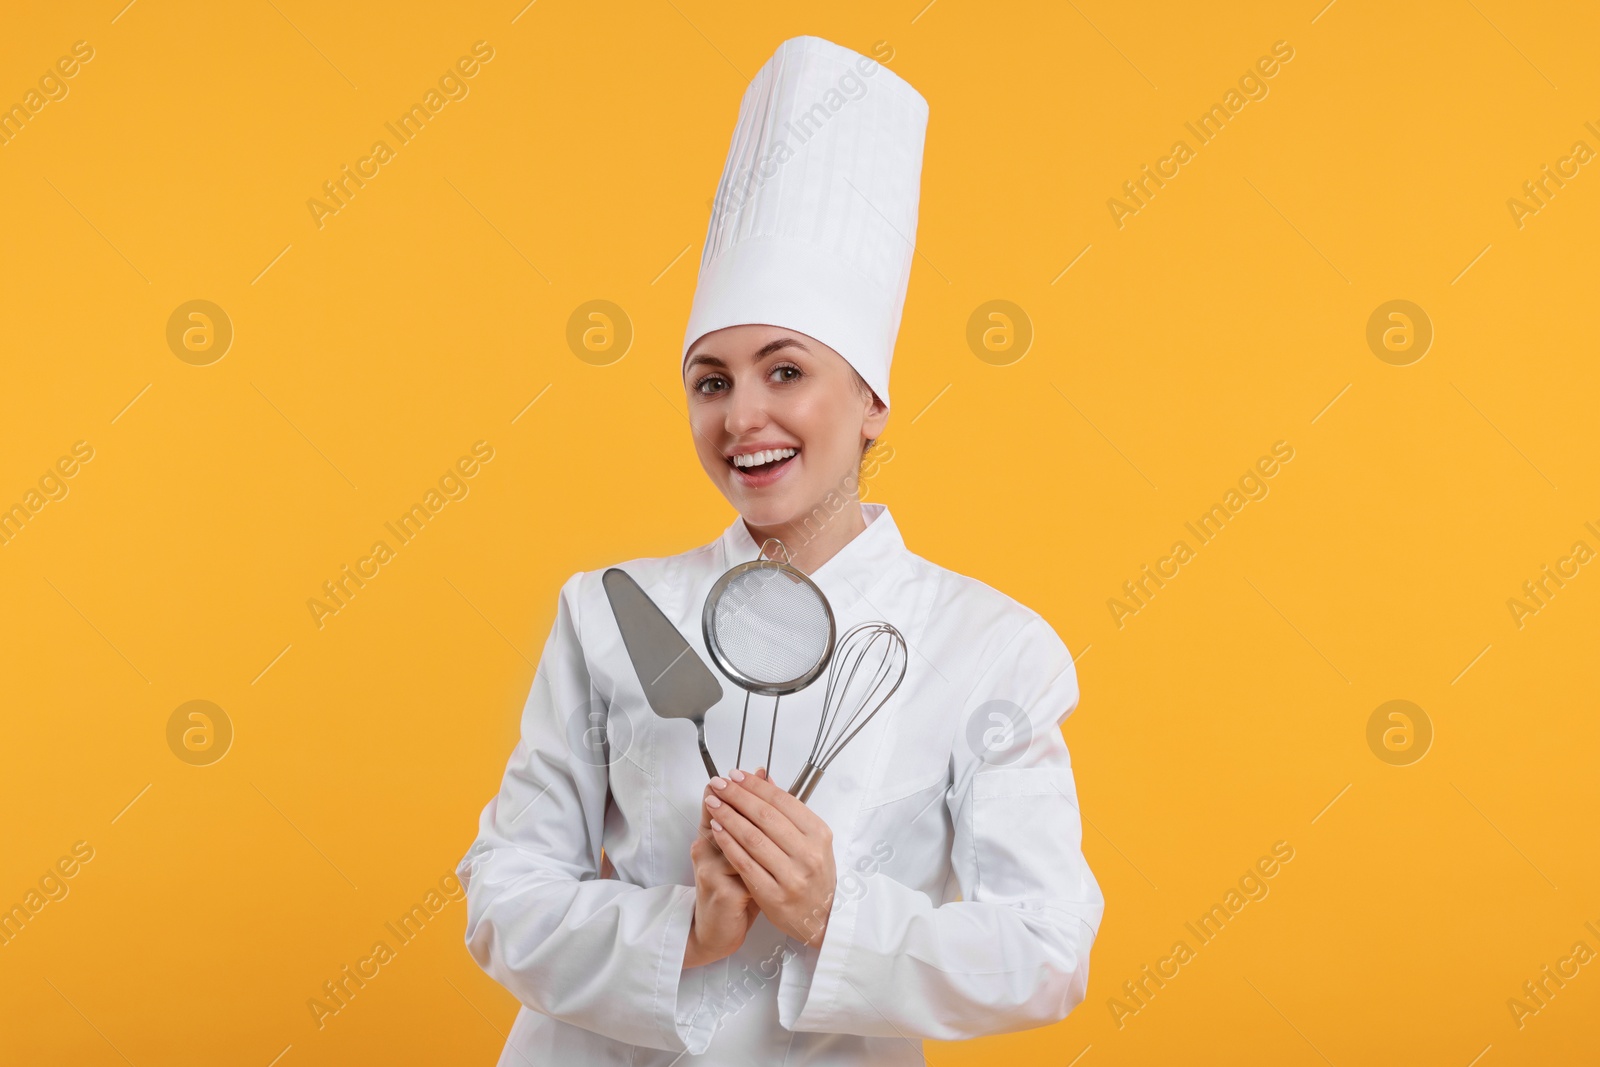 Photo of Happy confectioner in uniform holding professional tools on yellow background